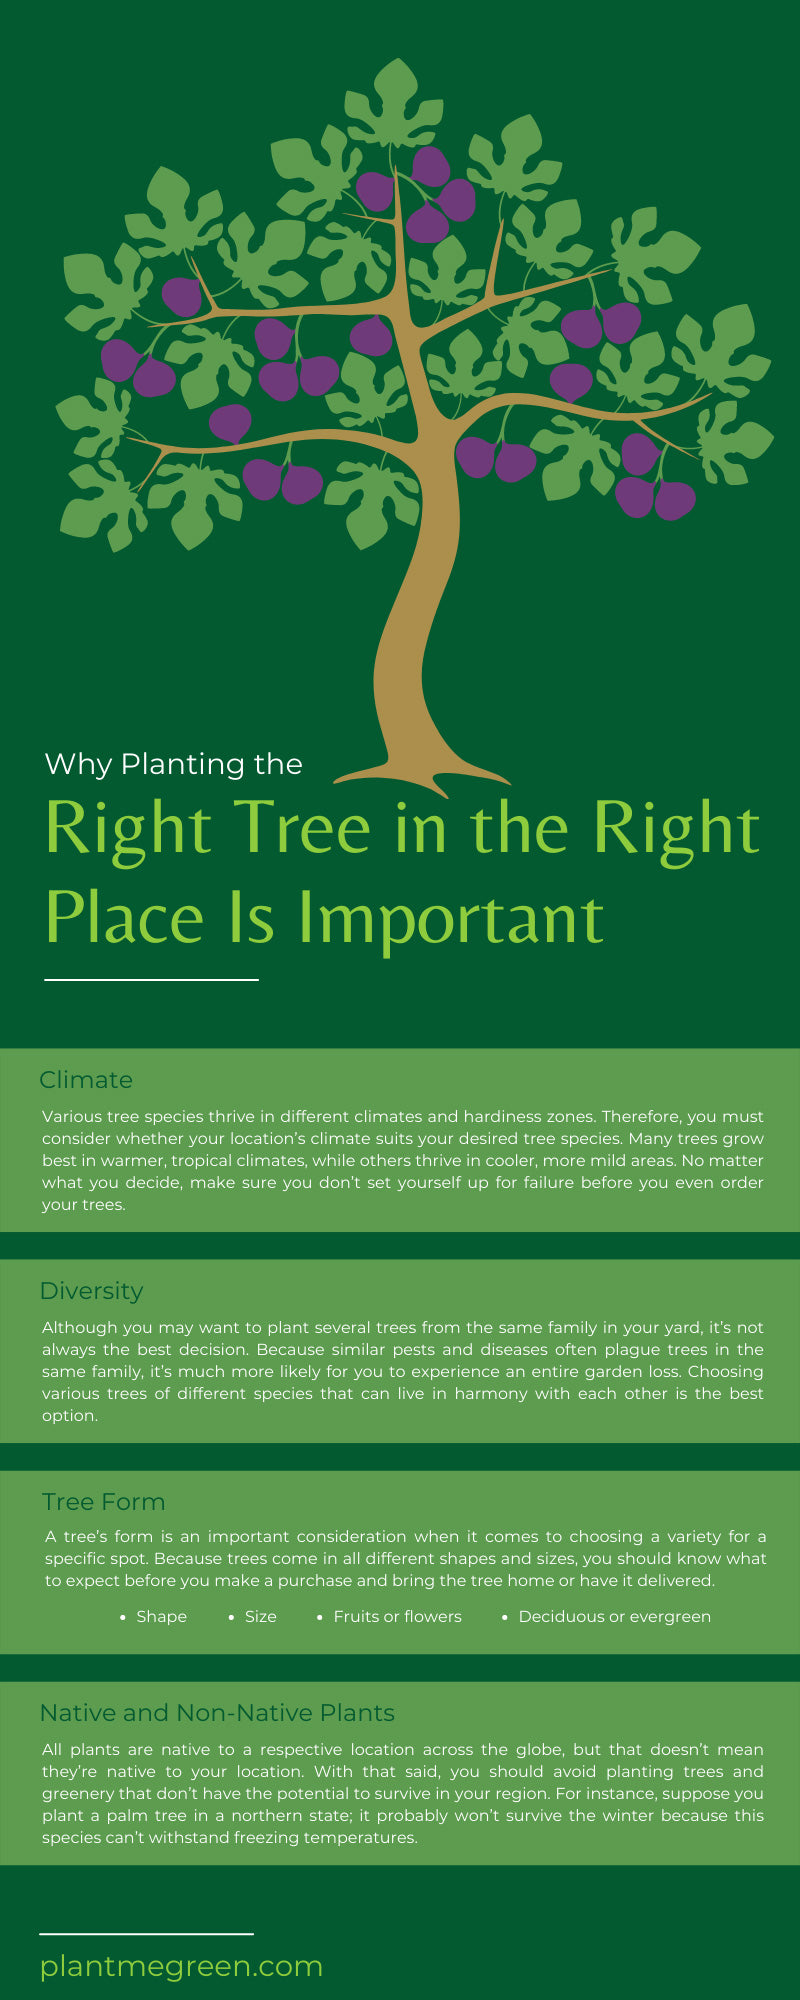 Why Planting the Right Tree in the Right Place Is Important